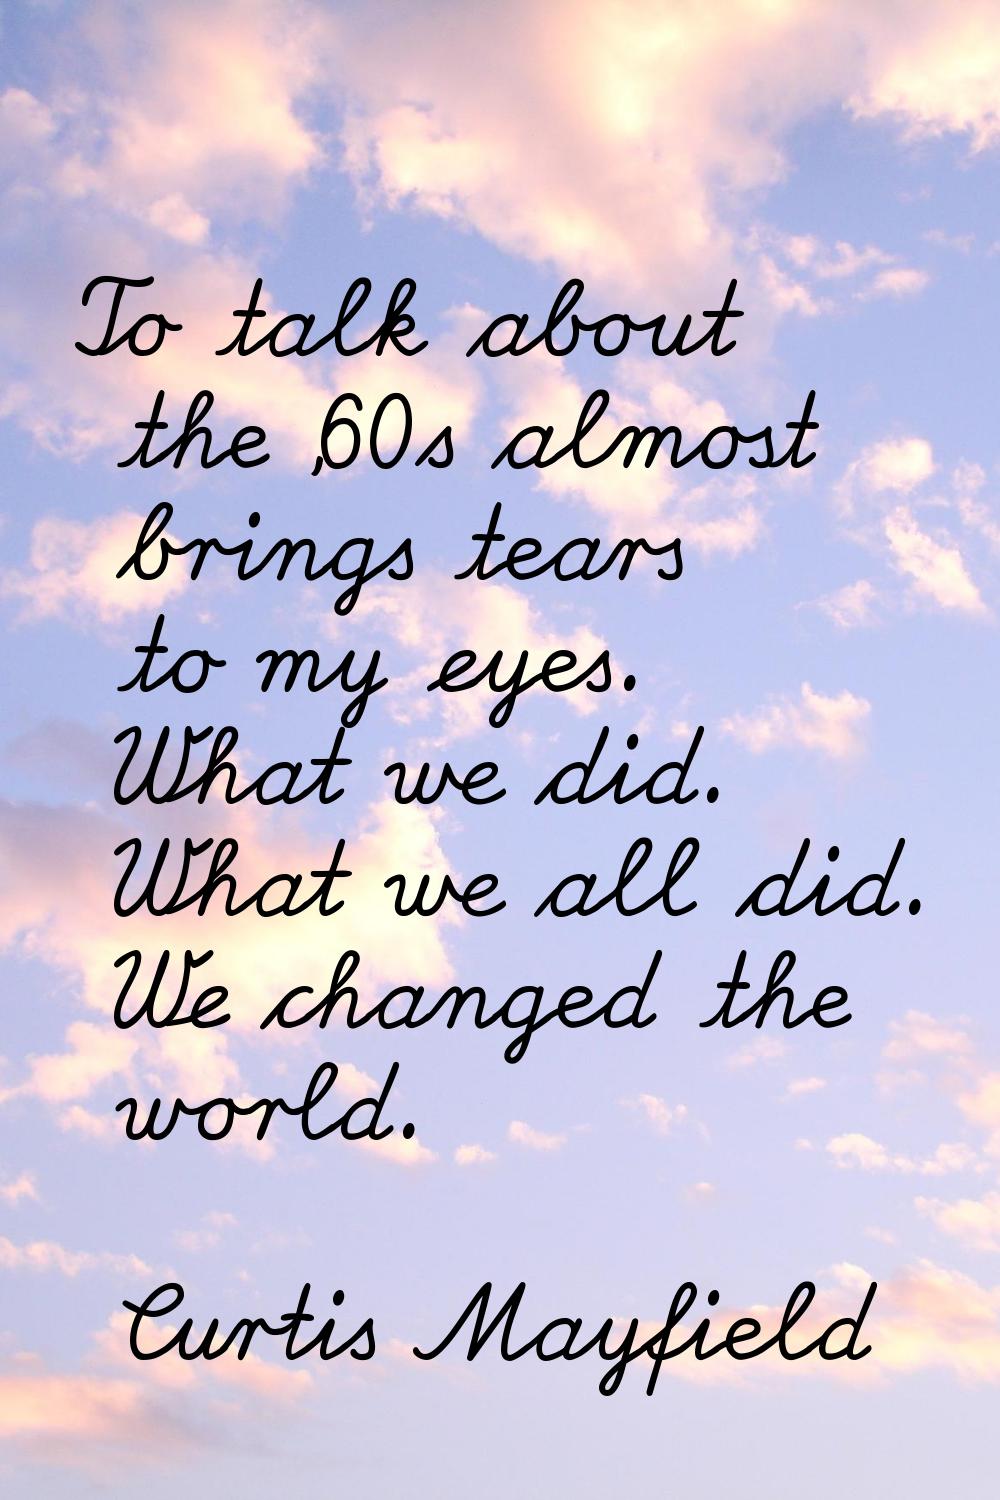 To talk about the '60s almost brings tears to my eyes. What we did. What we all did. We changed the